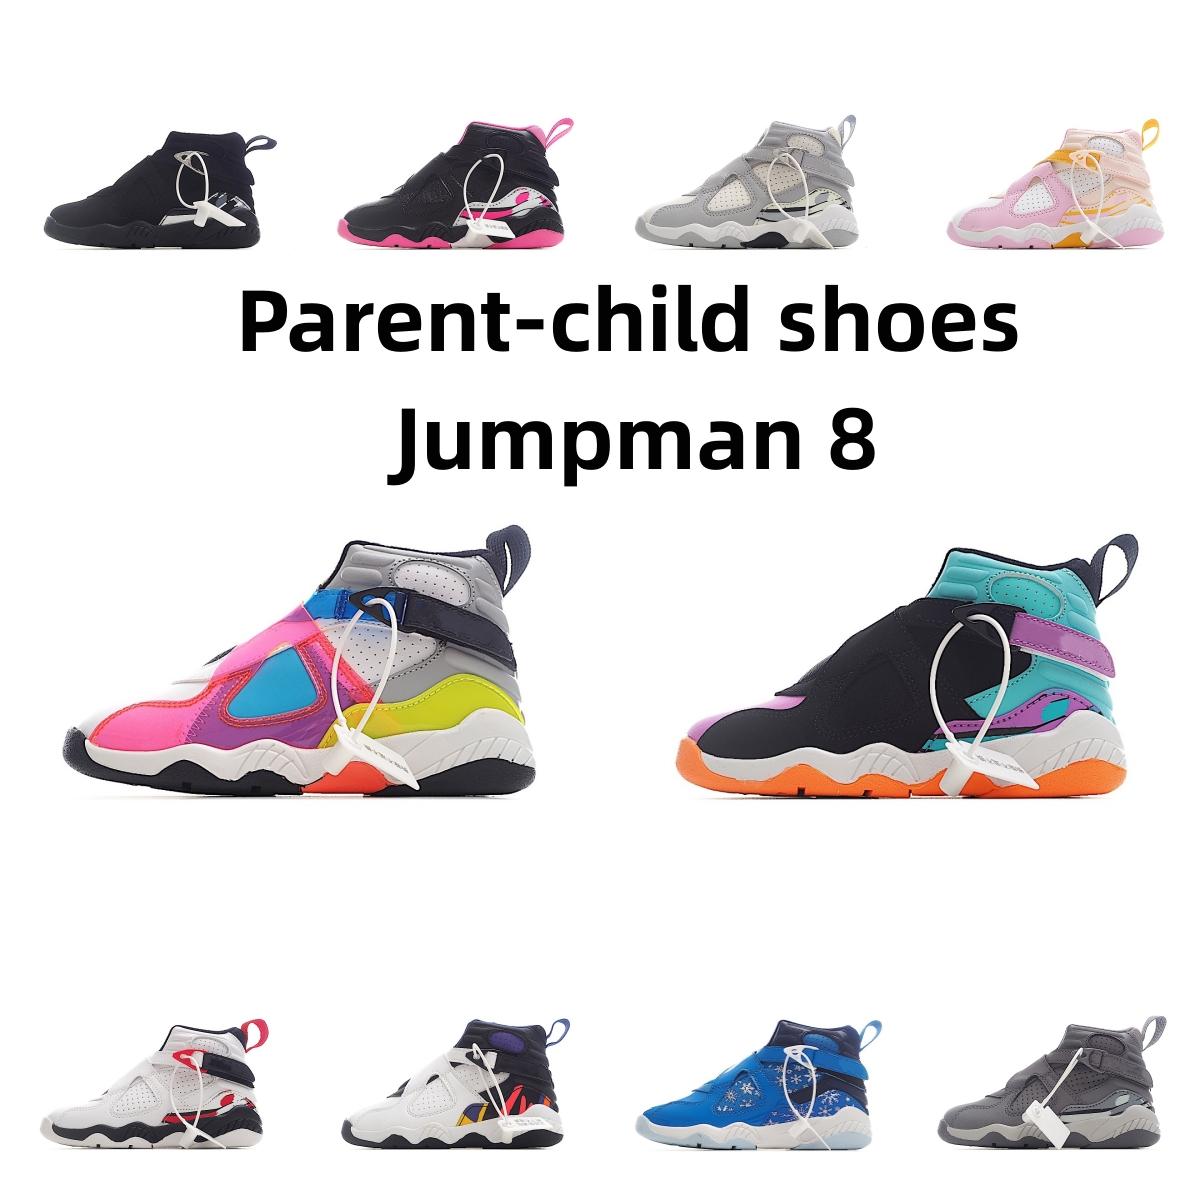 Jumpman 8 kid Basketball Shoes Grape 8s boys and girls Designer Parent-child Trainers Sneakers